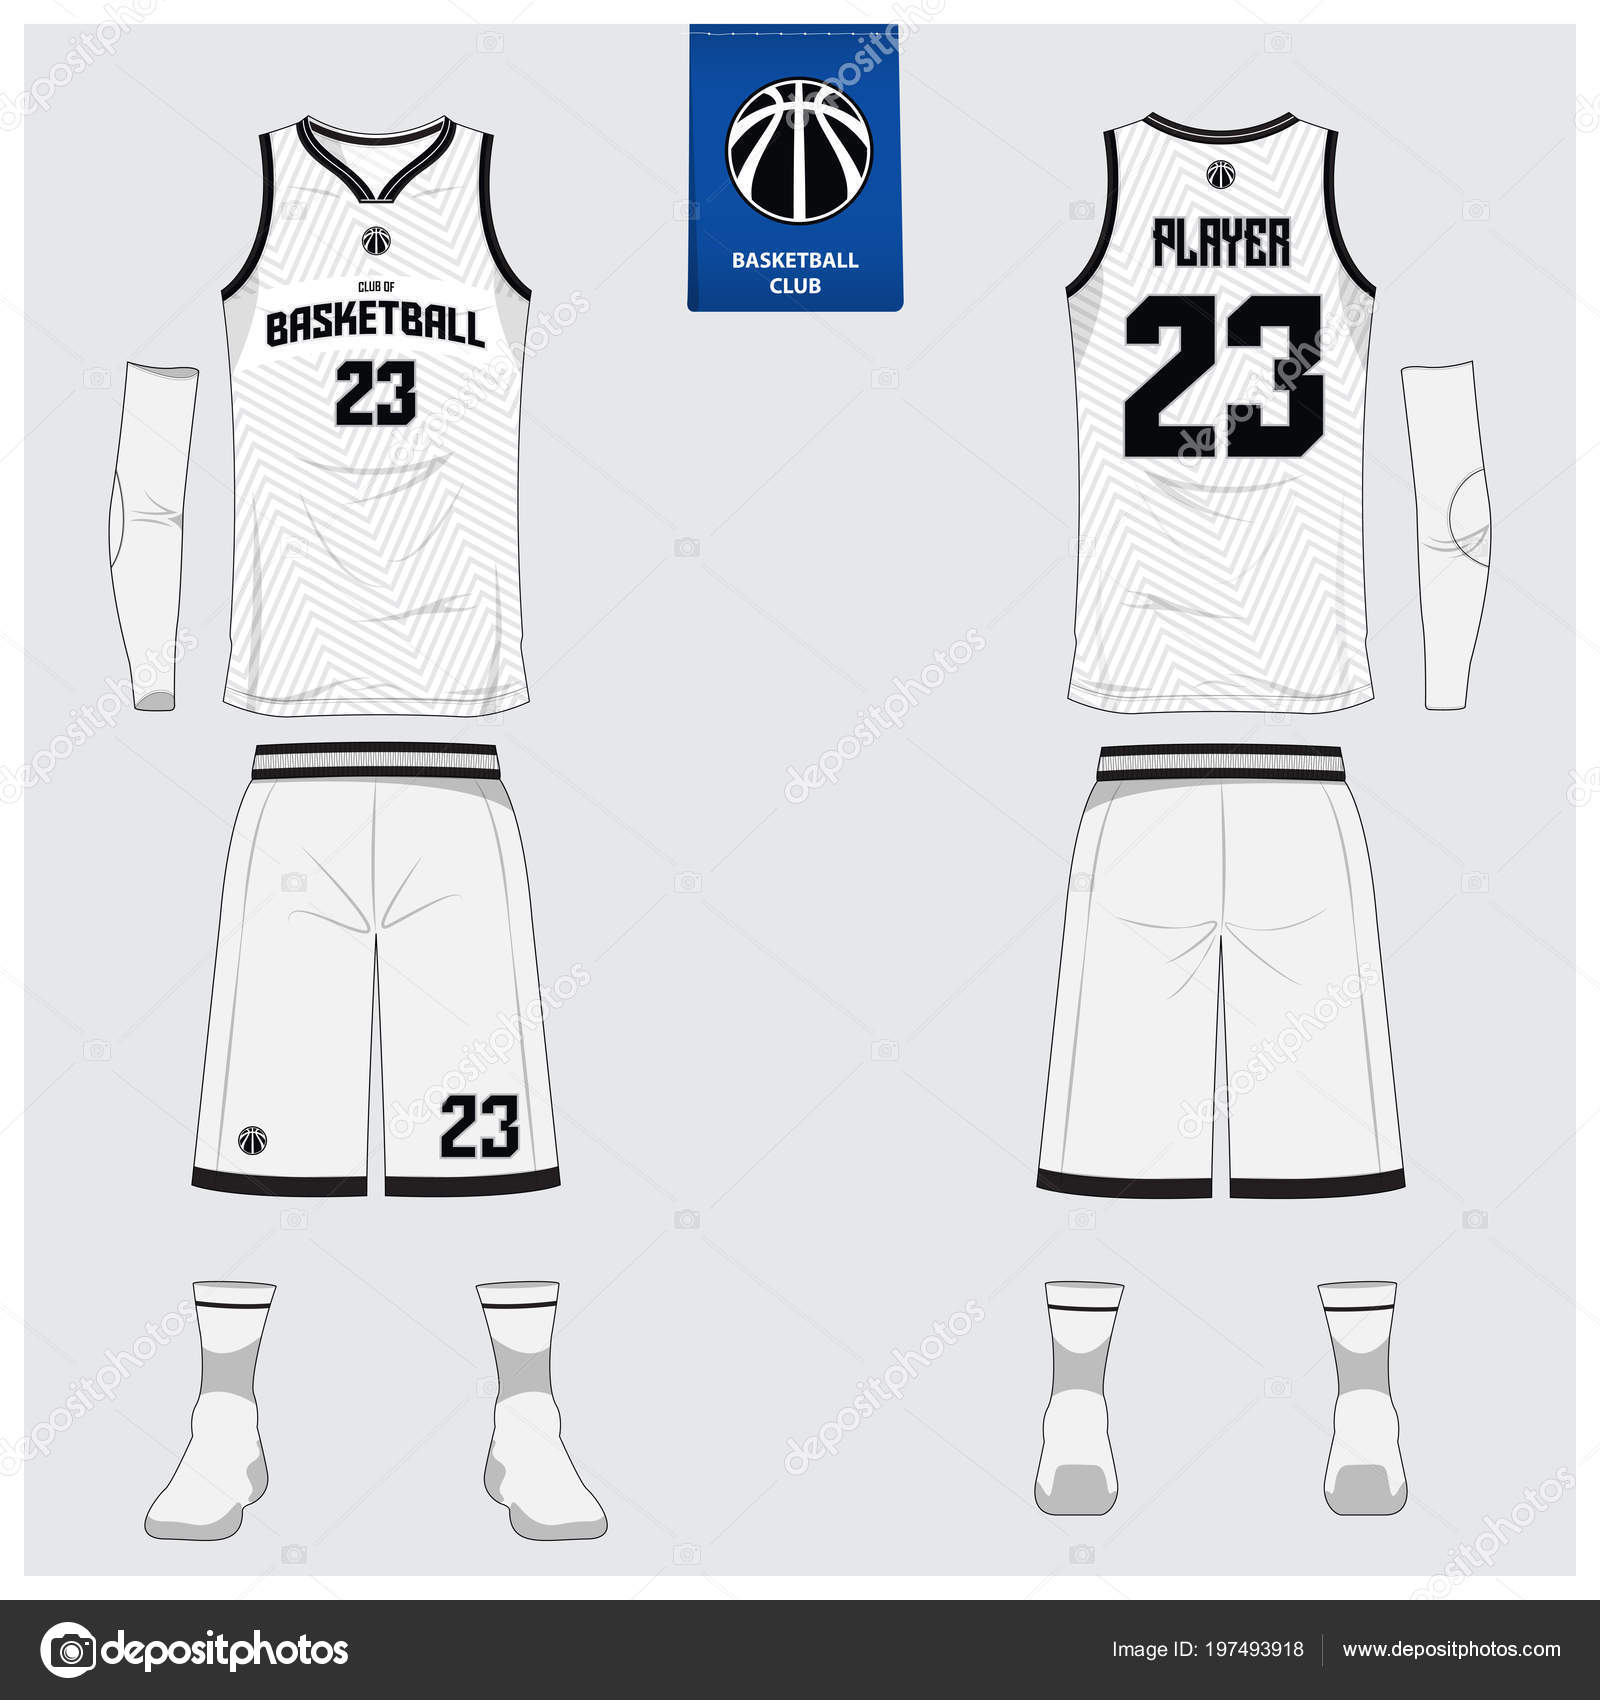 21,21 Basketball jersey template Vector Images, Basketball jersey For Blank Basketball Uniform Template